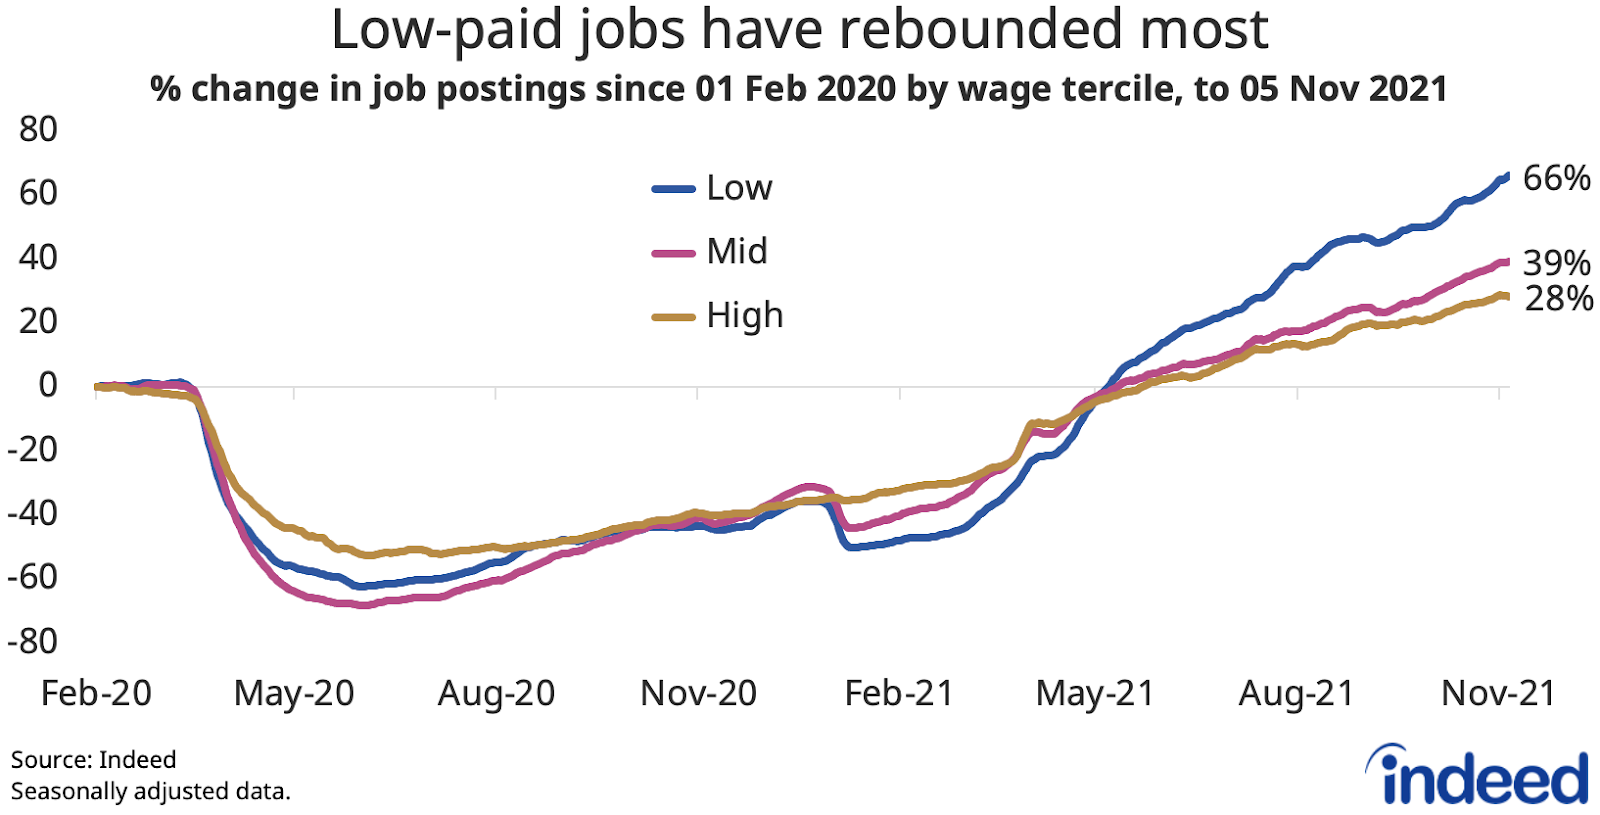 A line graph titled “Low-paid jobs have rebounded most” 